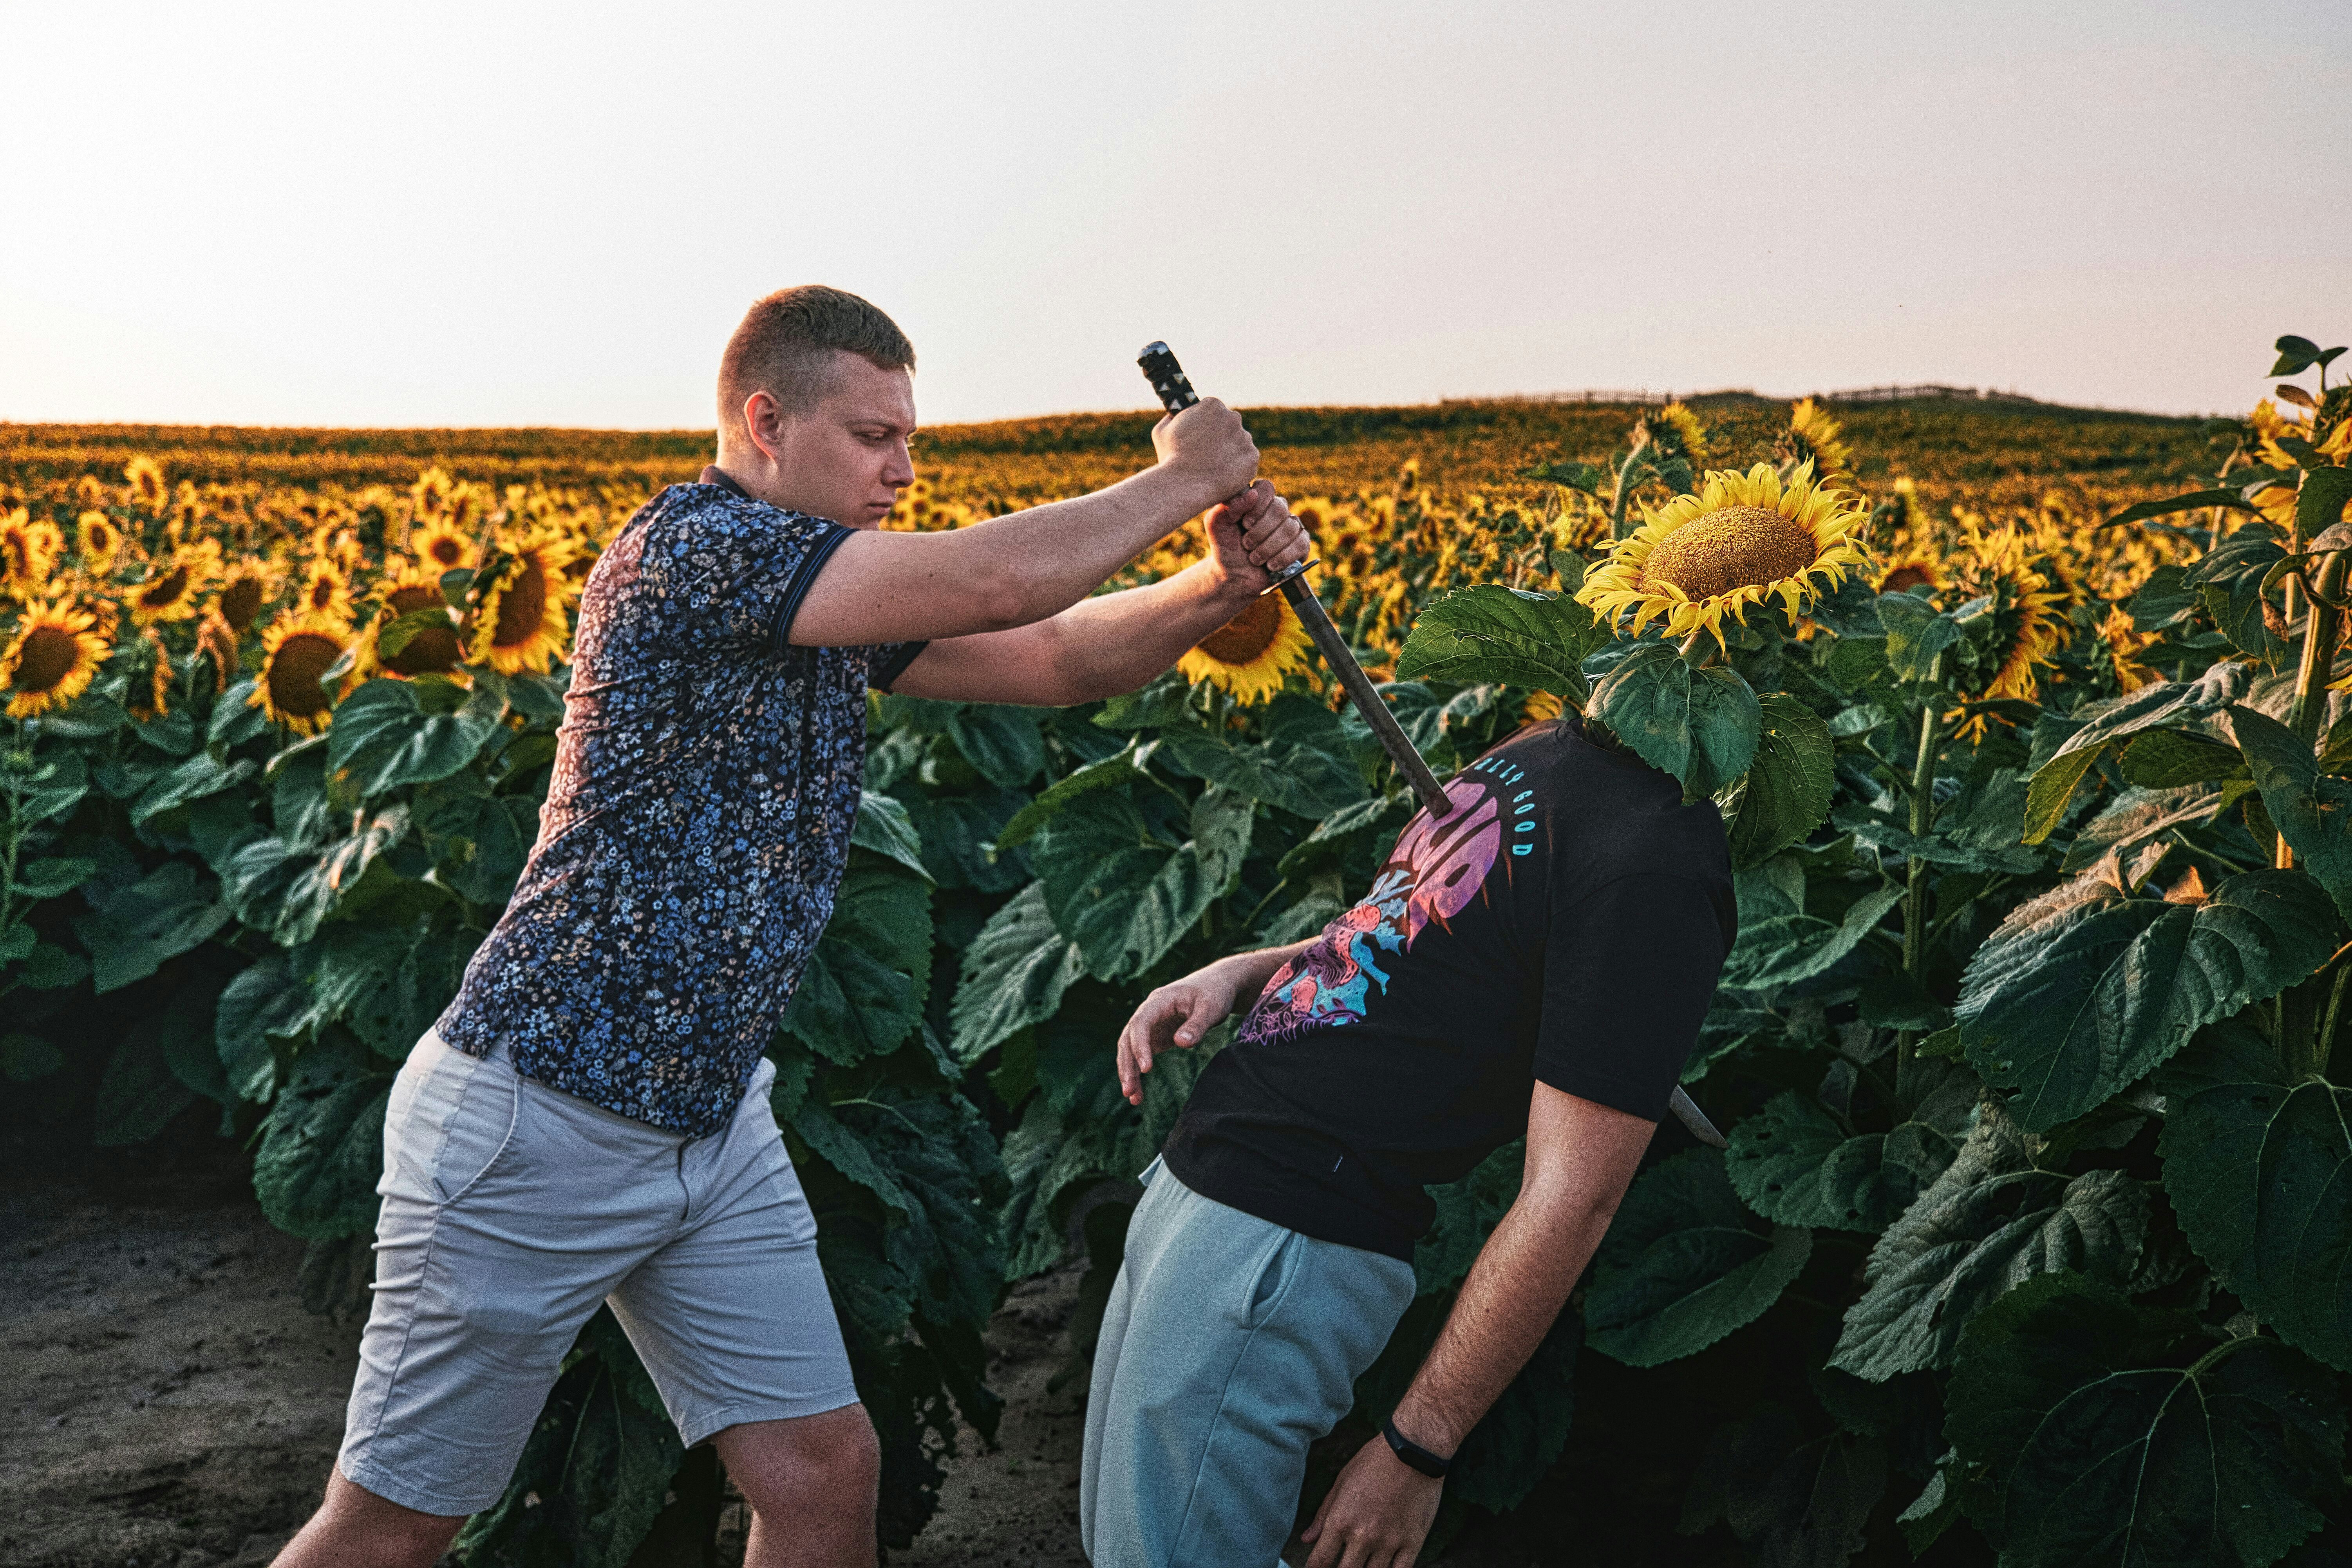 man in black t-shirt and gray shorts holding black stick standing beside yellow sunflower field